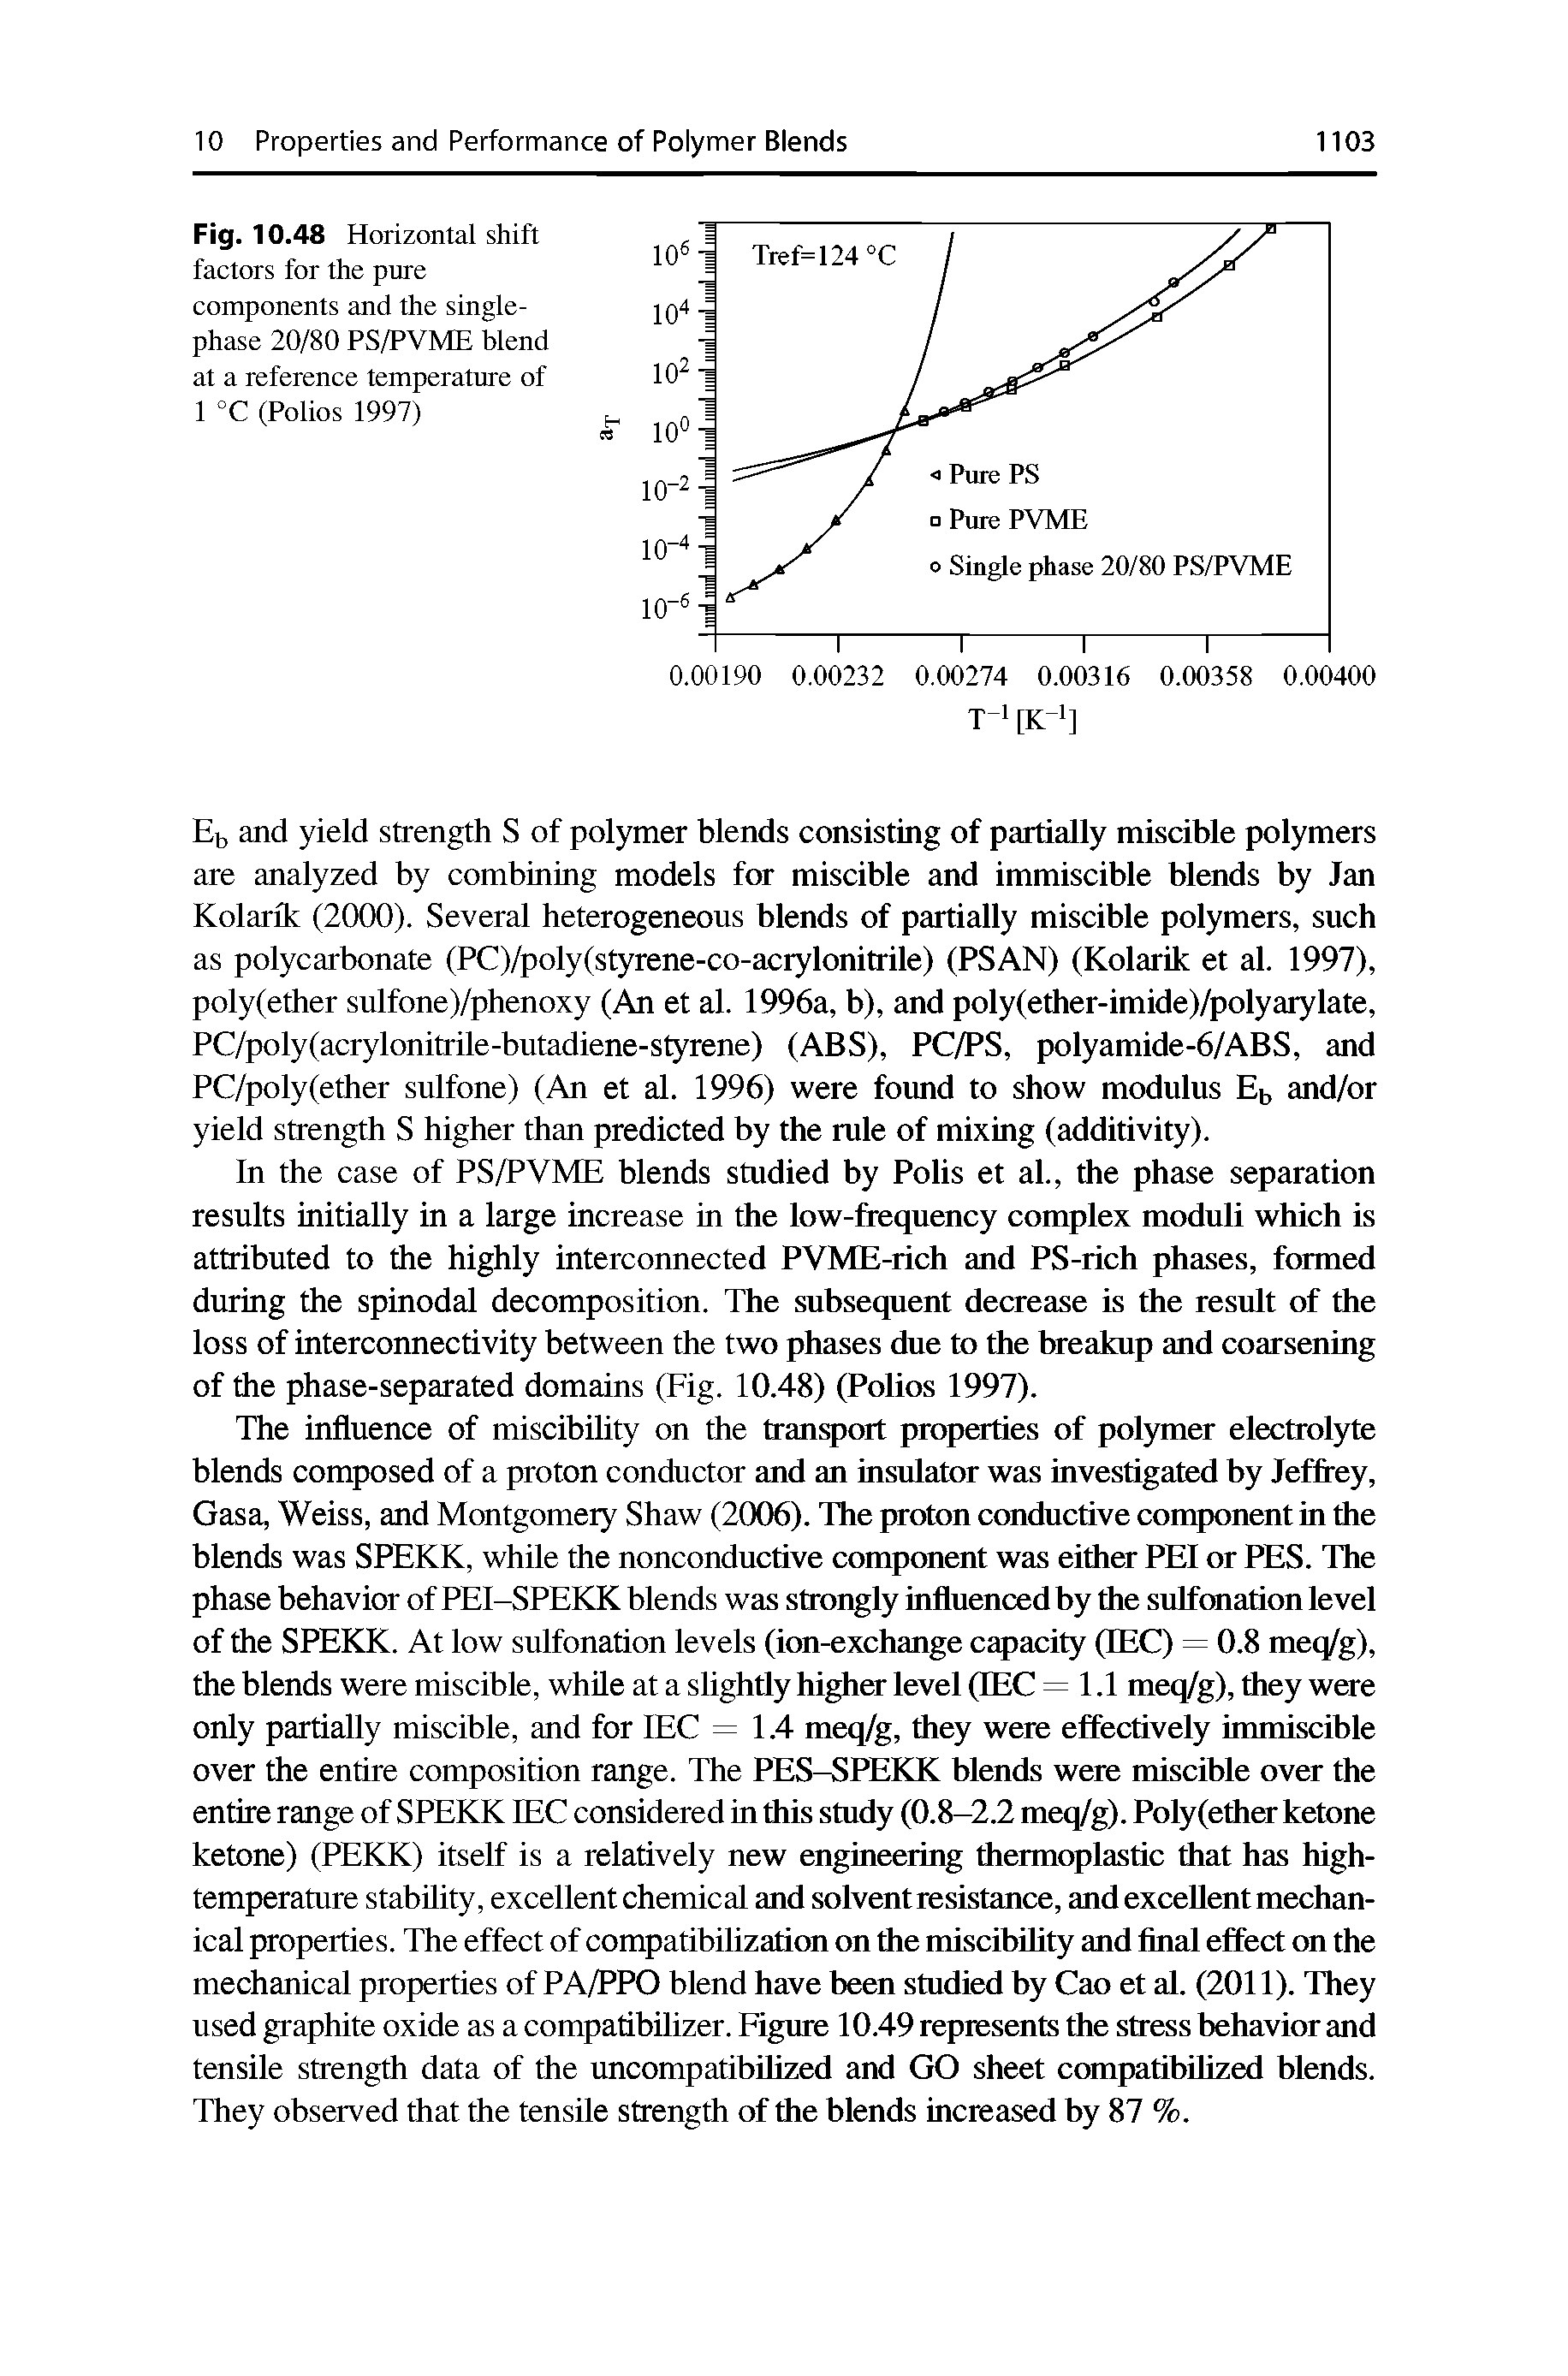 Fig. 10.48 Horizontal shift factors for the pure components and the singlephase 20/80 PS/PVME blend at a reference temperature of 1 °C (Polios 1997)...